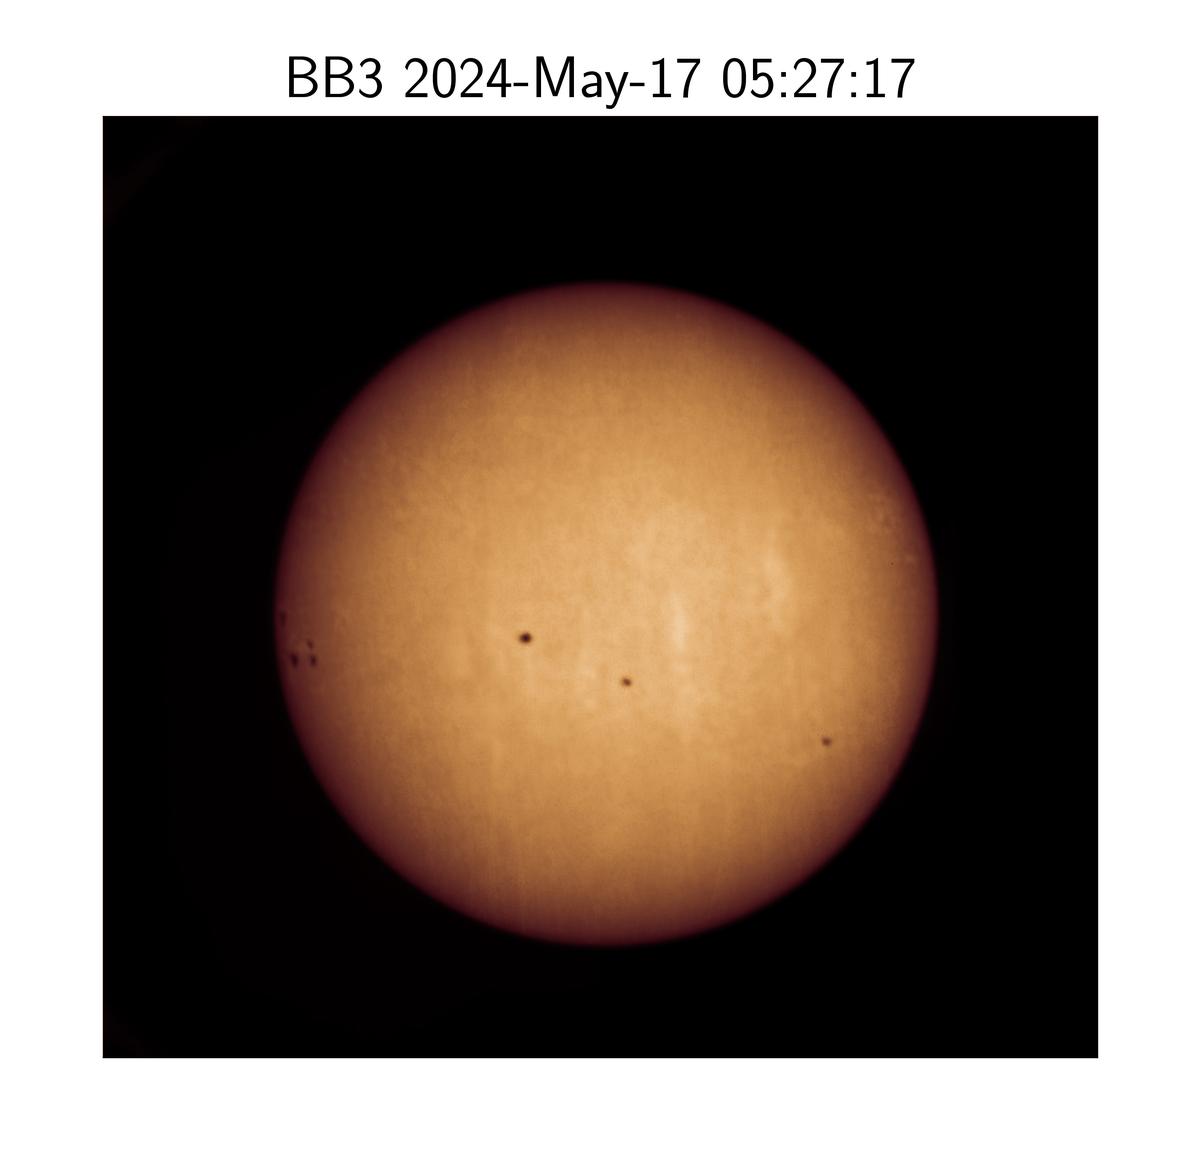 An image captured by SUIT and VELC instruments (Aditya-L1 mission) shows dynamic activities of the Sun during May 2024.